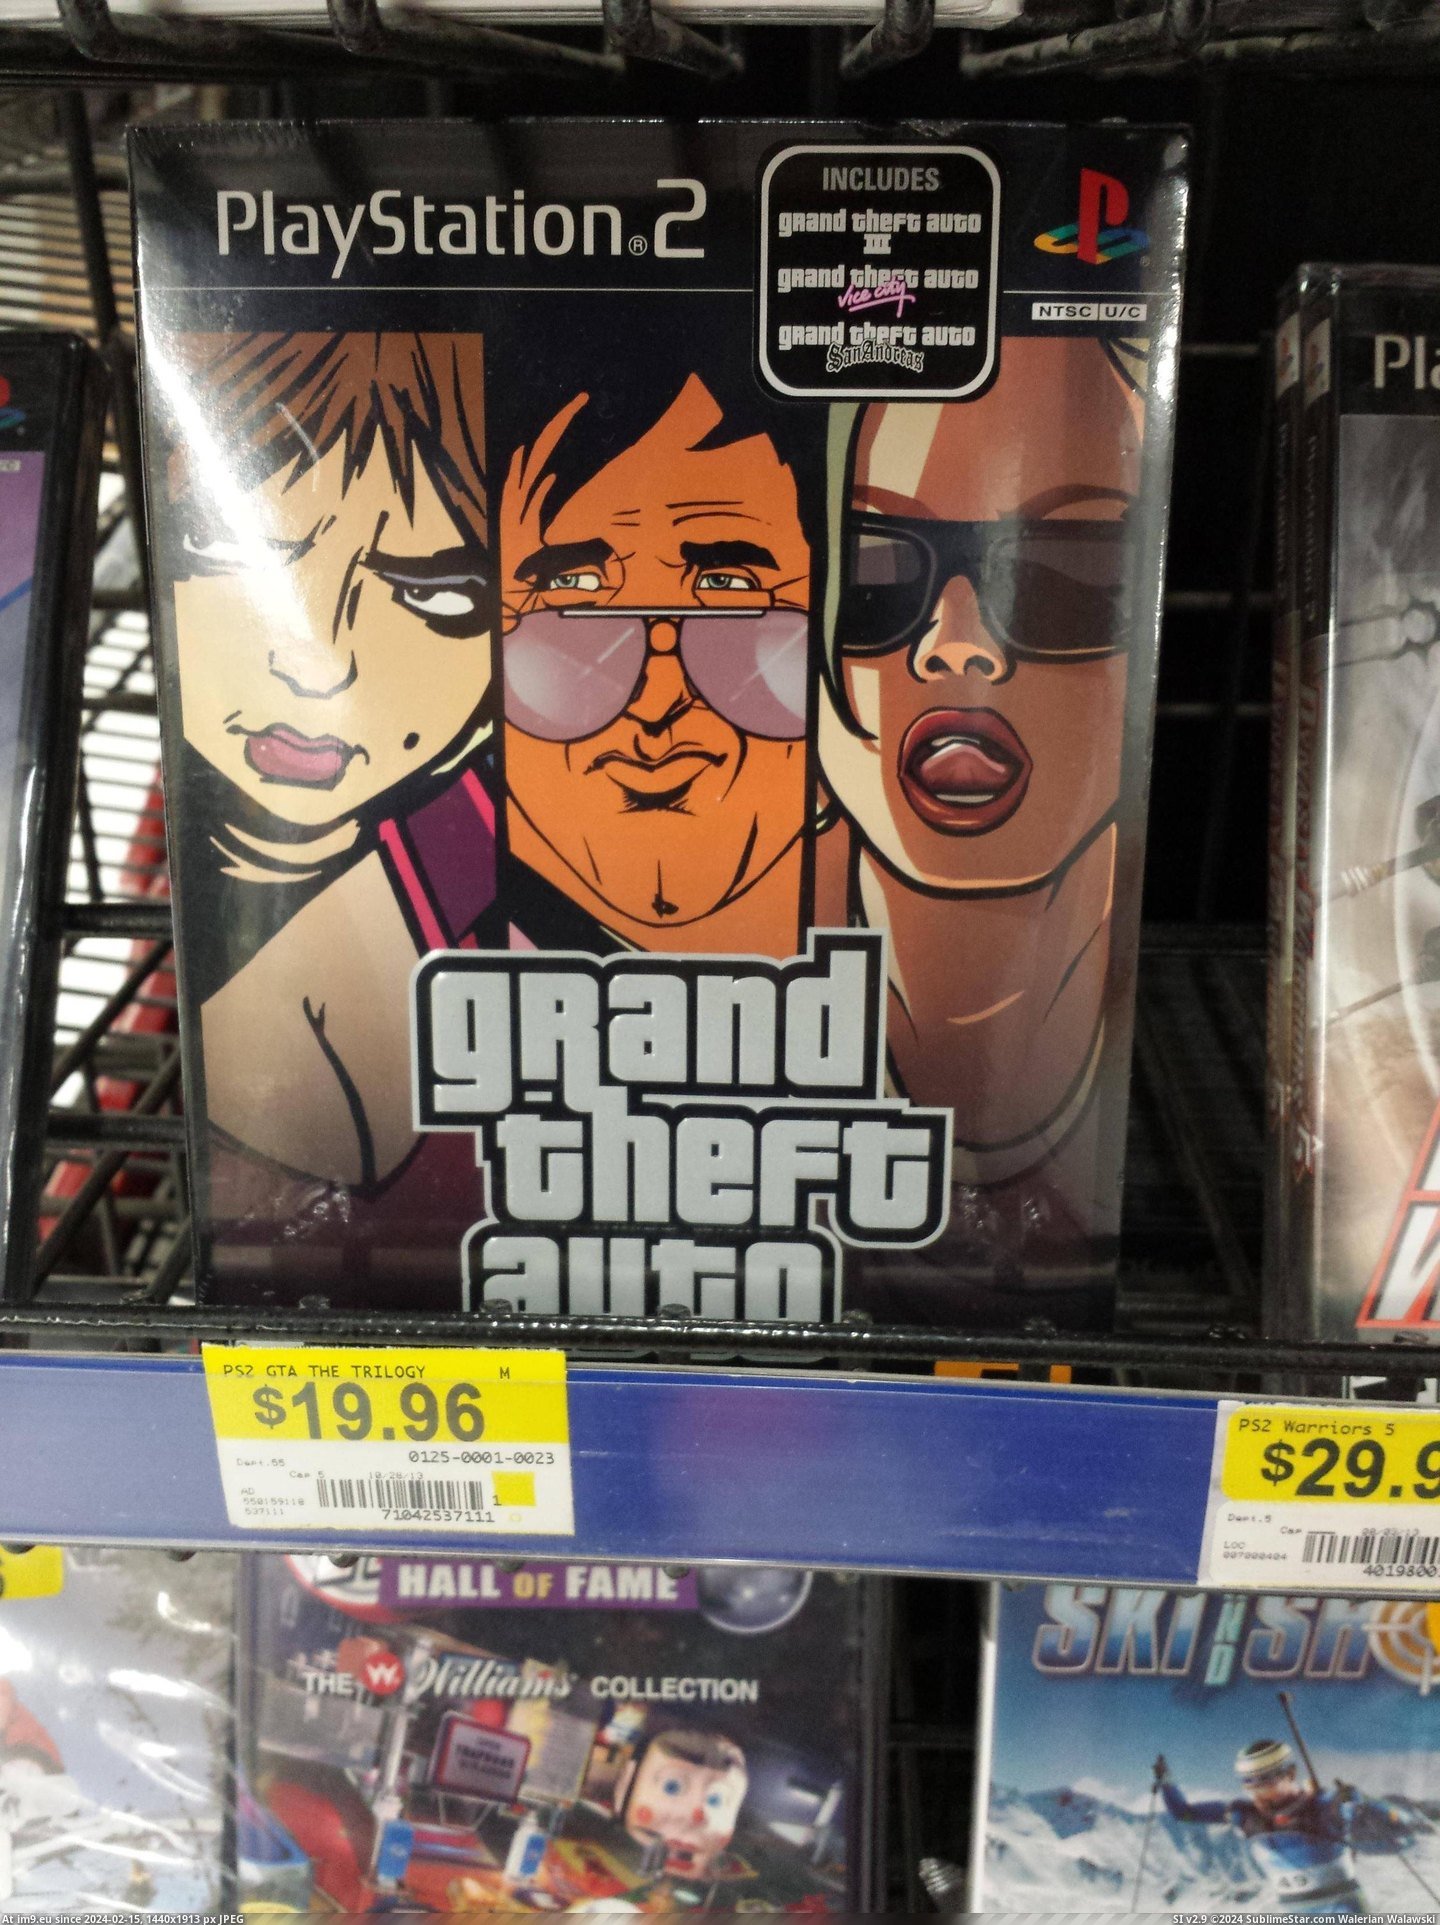 #Gaming #Games #Sold #Wal #Mart #Texas #Ps2 [Gaming] At a Wal-Mart in Texas. Didn't know ps2 games were still sold. Pic. (Bild von album My r/GAMING favs))